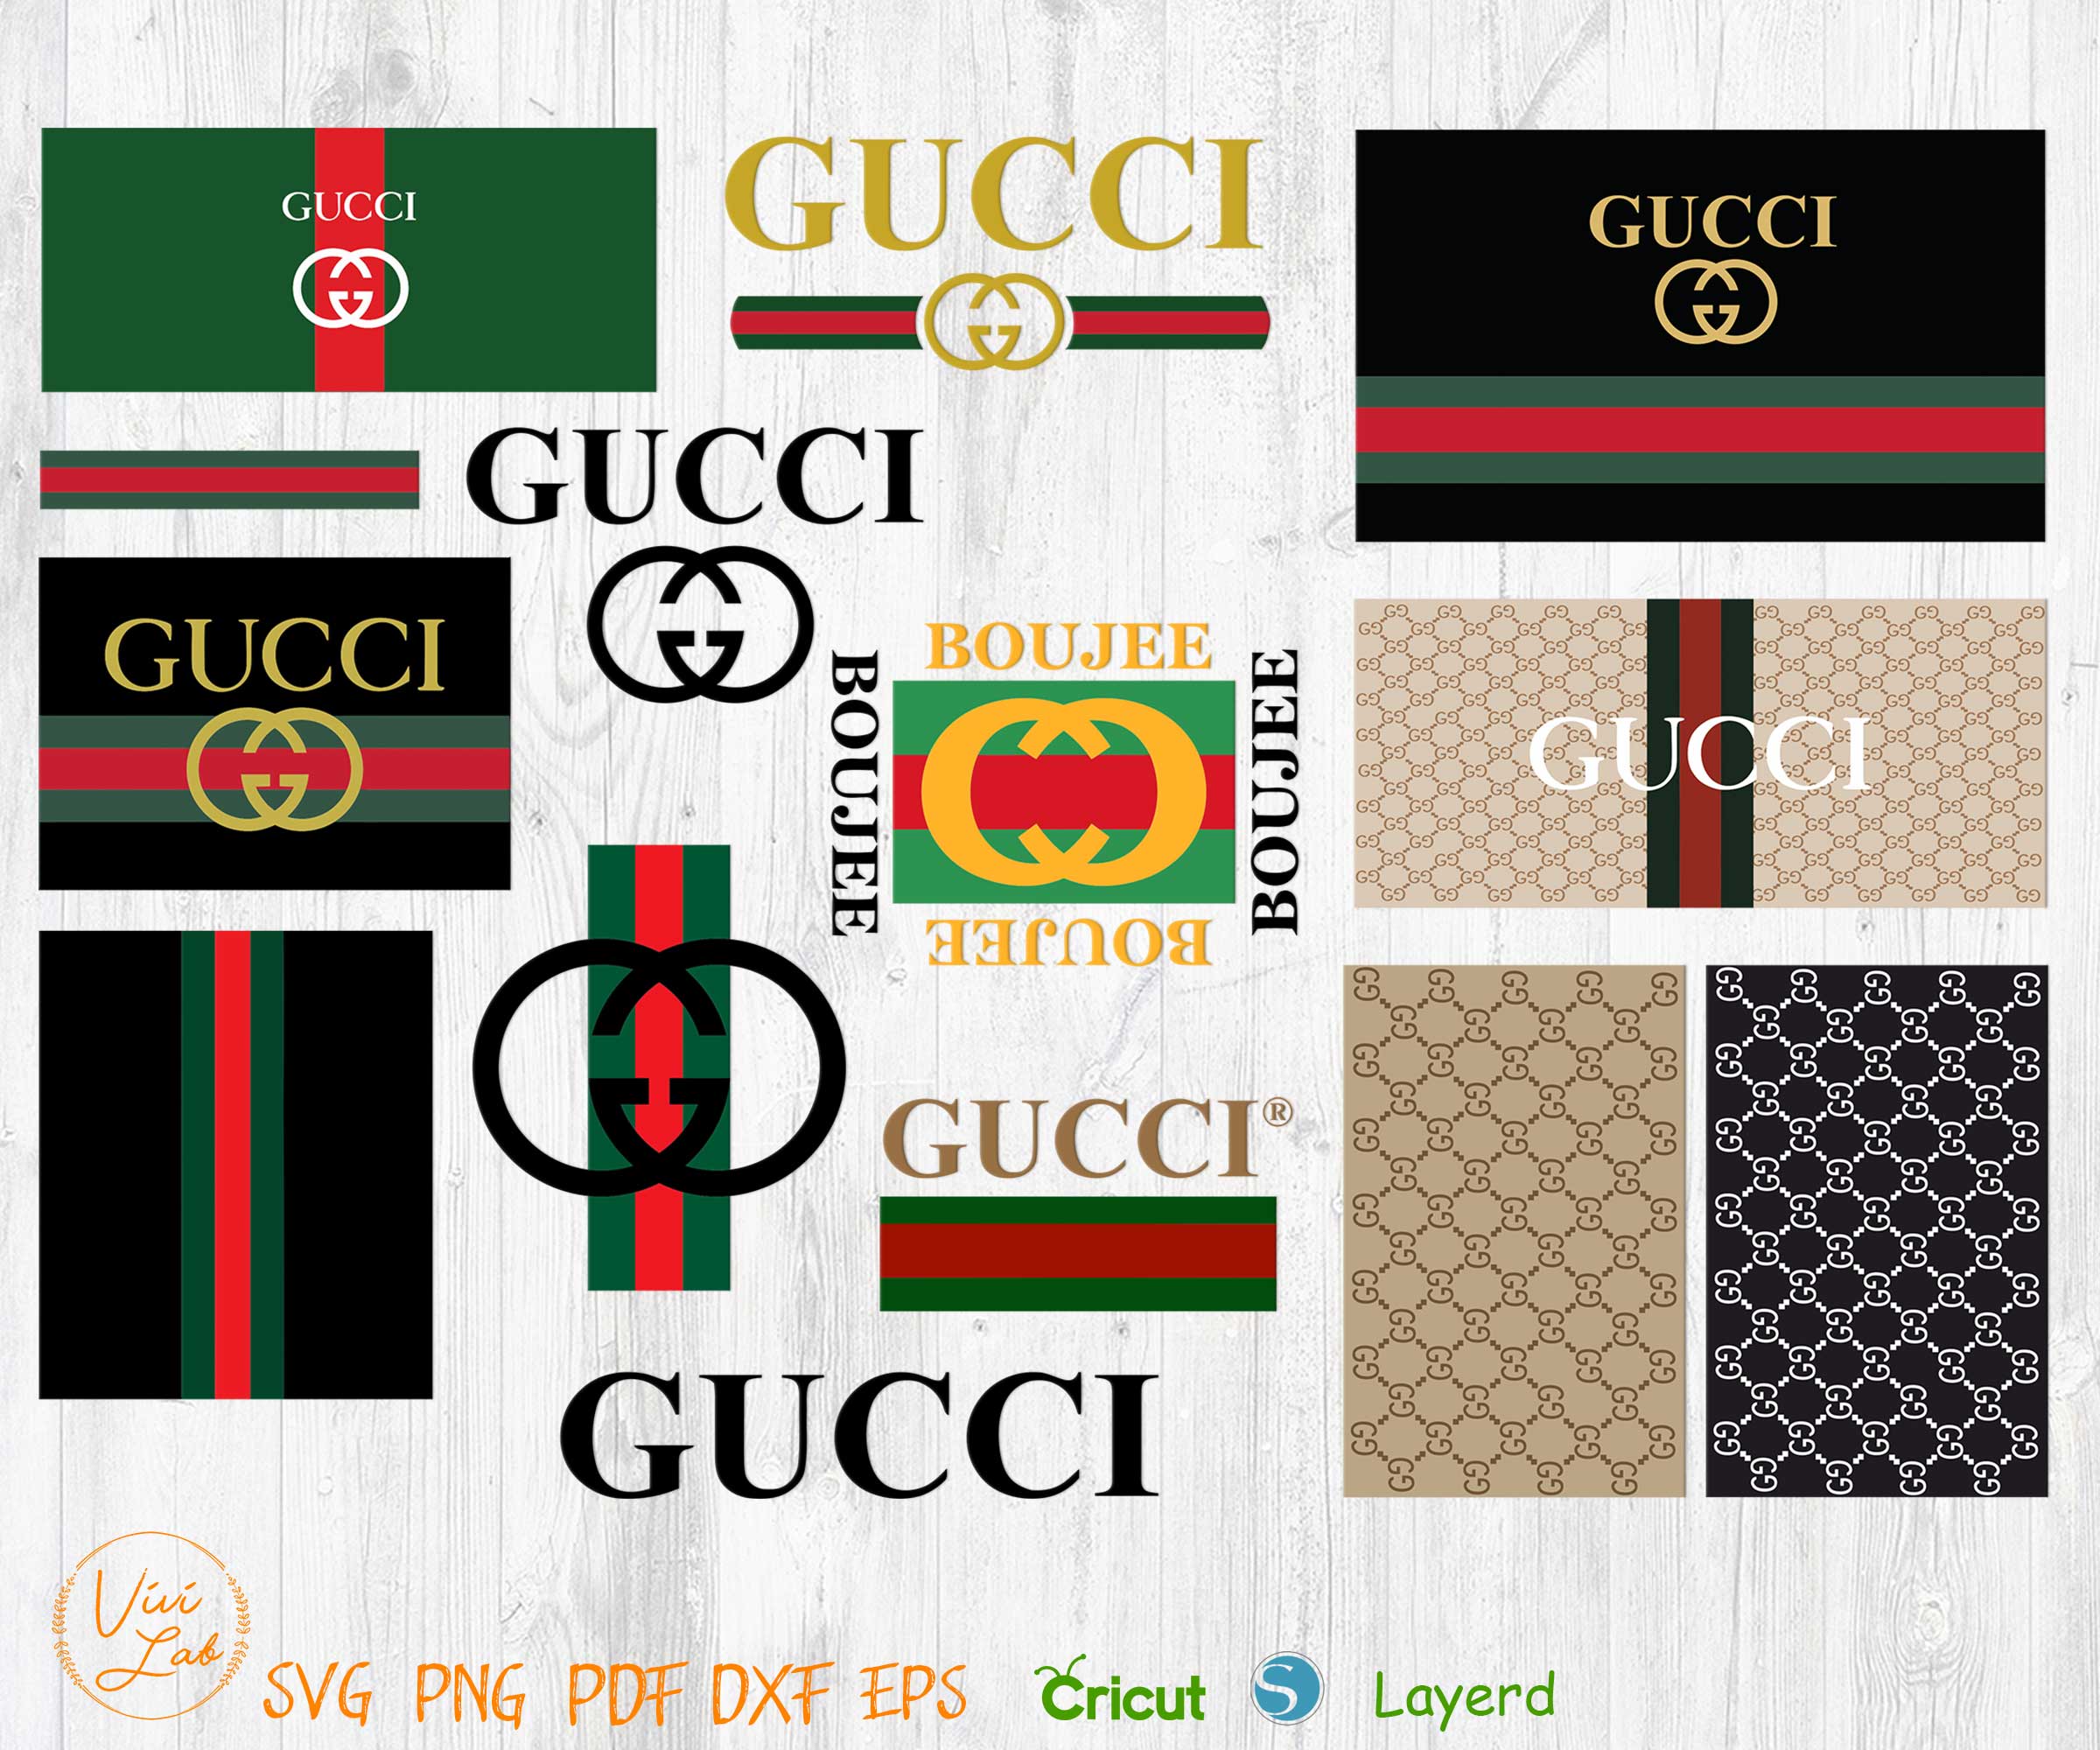 Gucci logo and pattern svg png vector